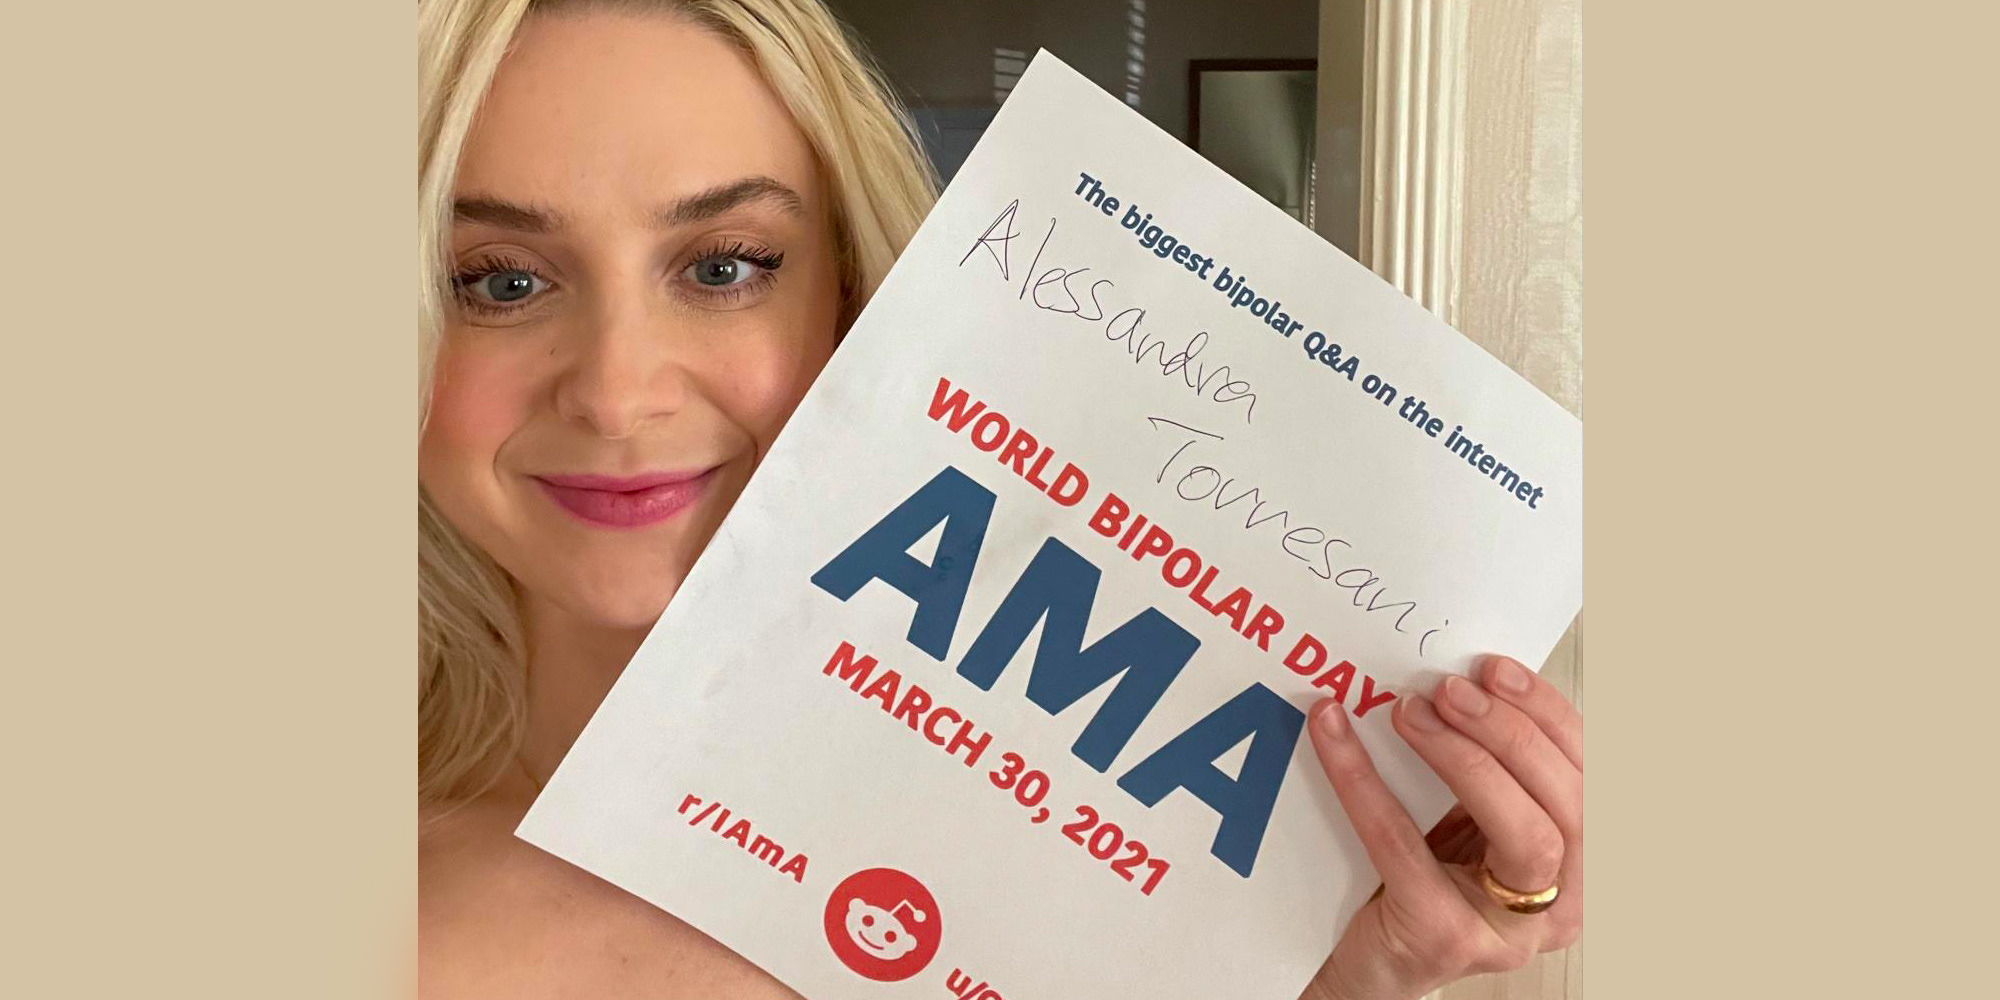 Alessandra indoors. She has white skin, shoulder-length blonde hair, and blue eyes. She is holding the AMA proof sign and smiling with a closed mouth.